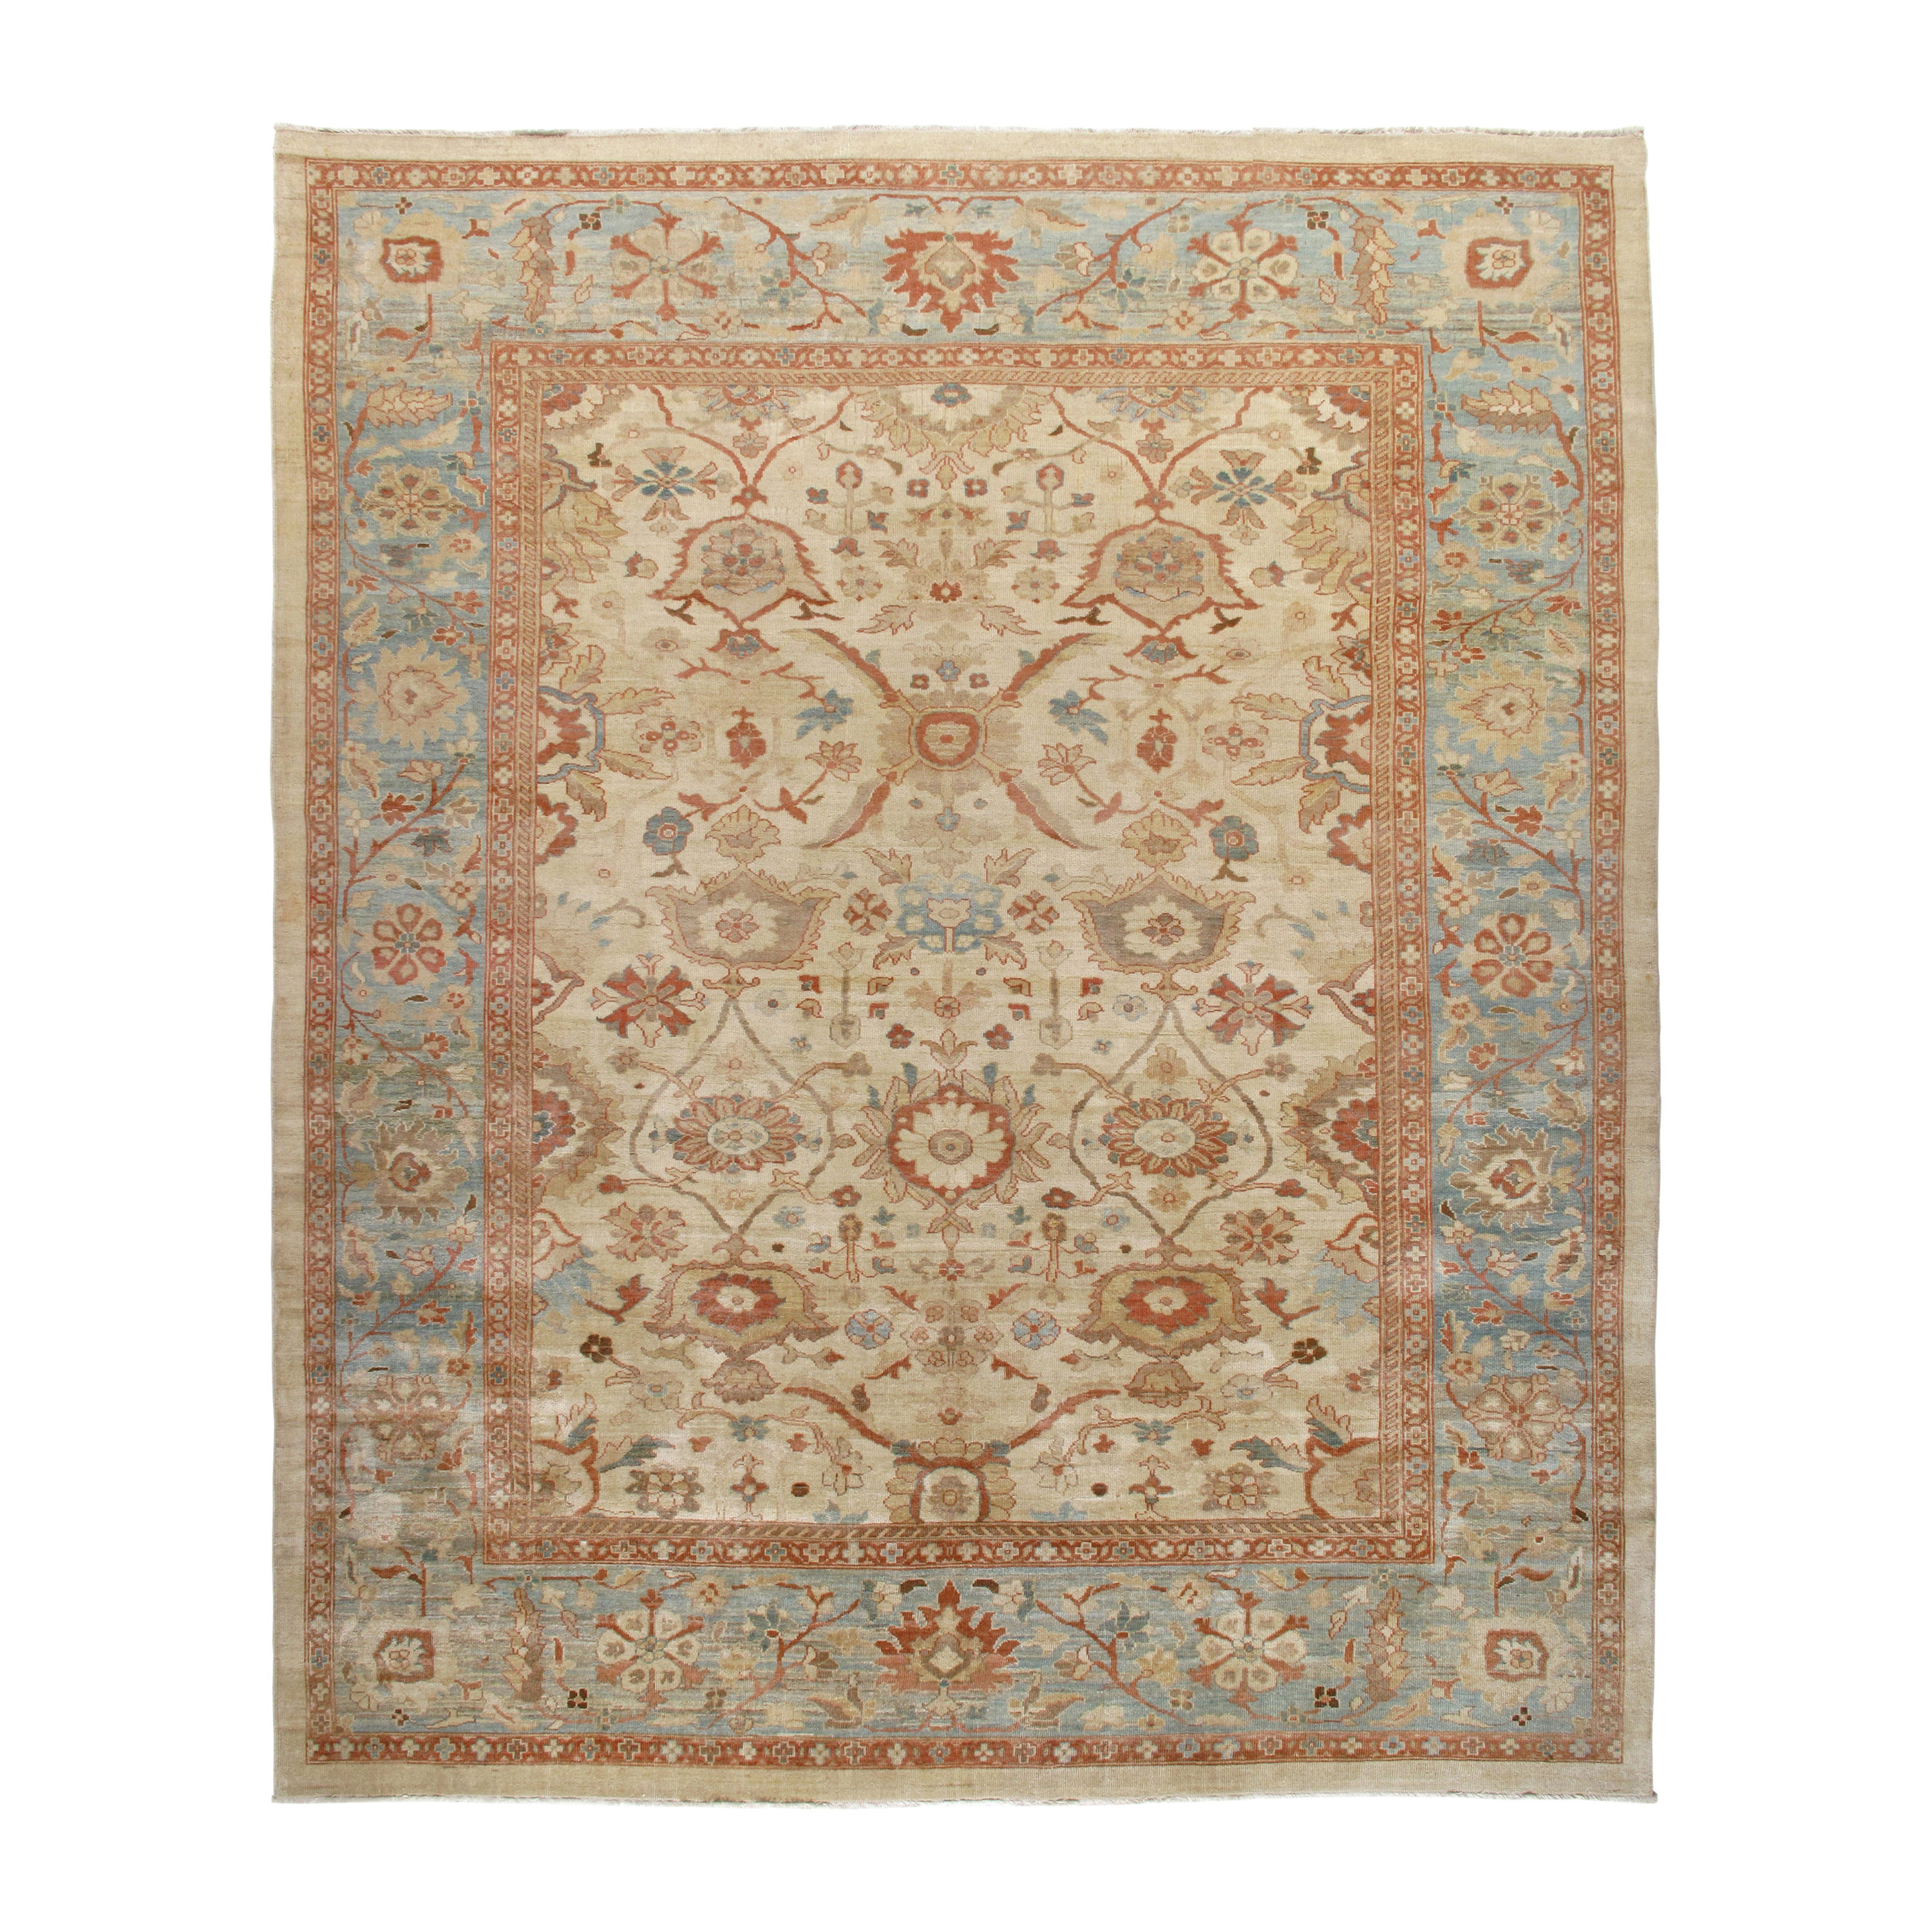  This Ziegler Sultanabad rug made by fiber procurement, hand weaving, and the use of organic dyes.